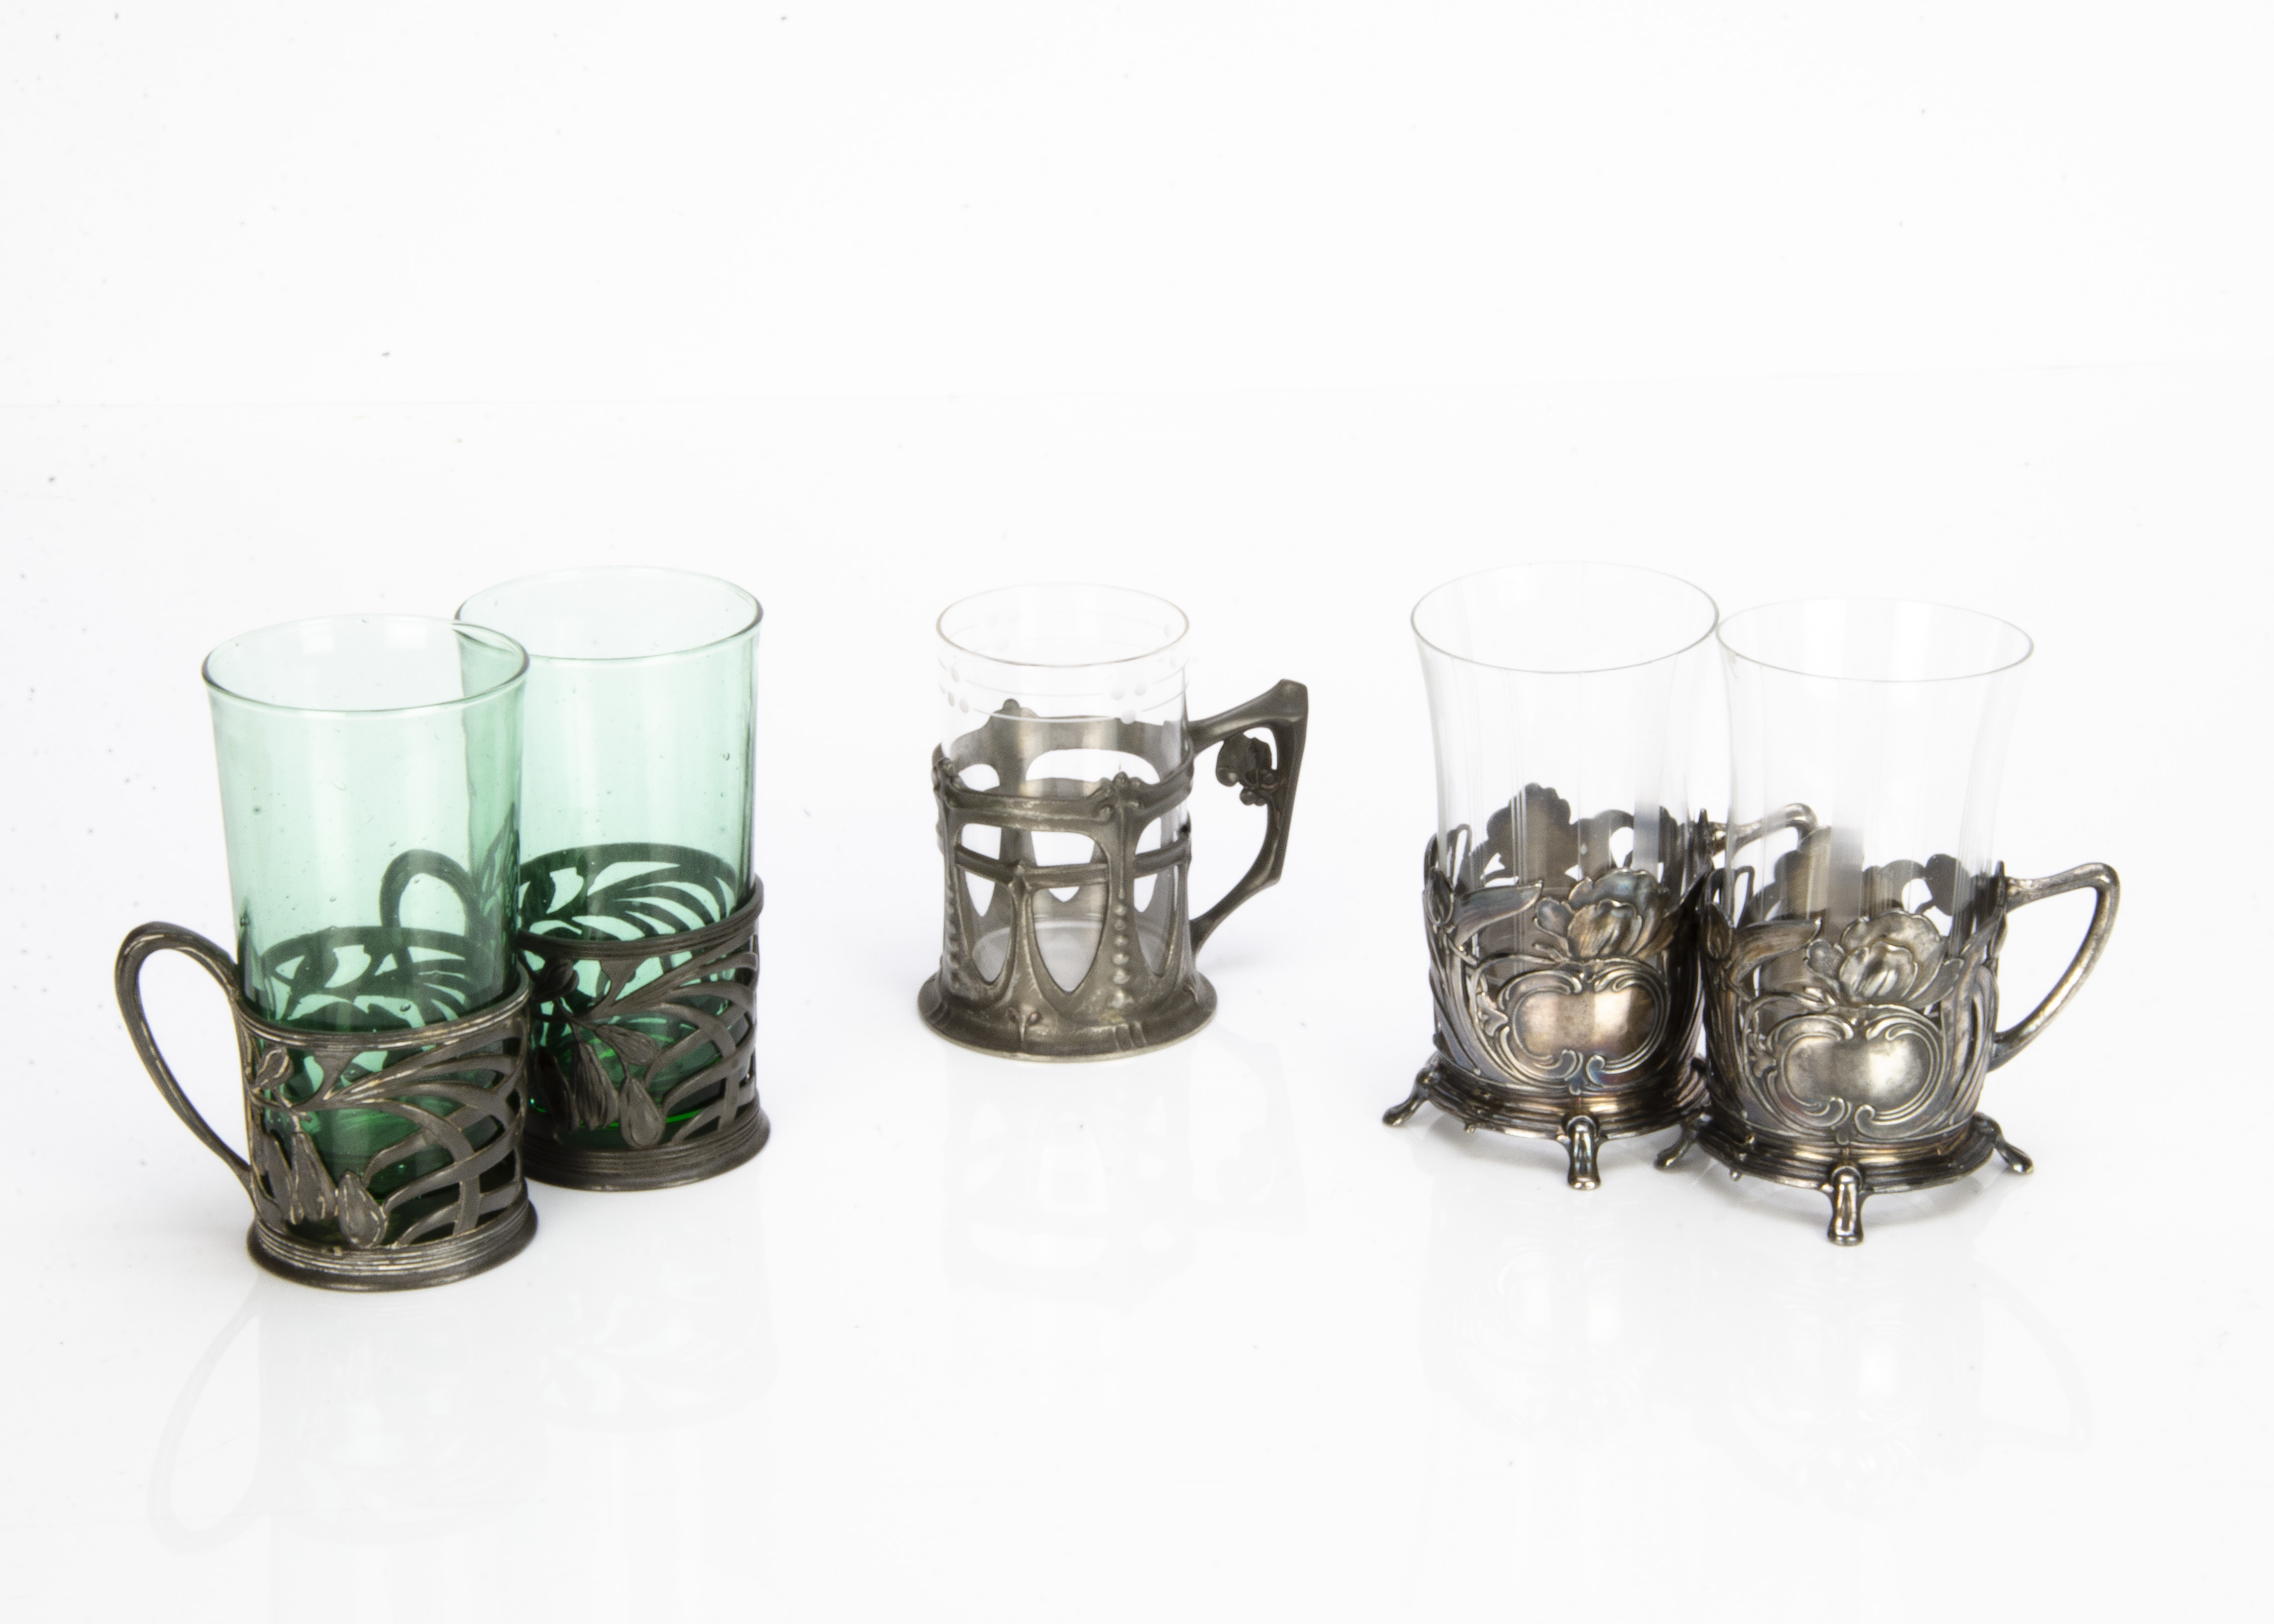 A pair of Orivit pewter Jugendstil glass or cup holders, decorated with pierced design of flower